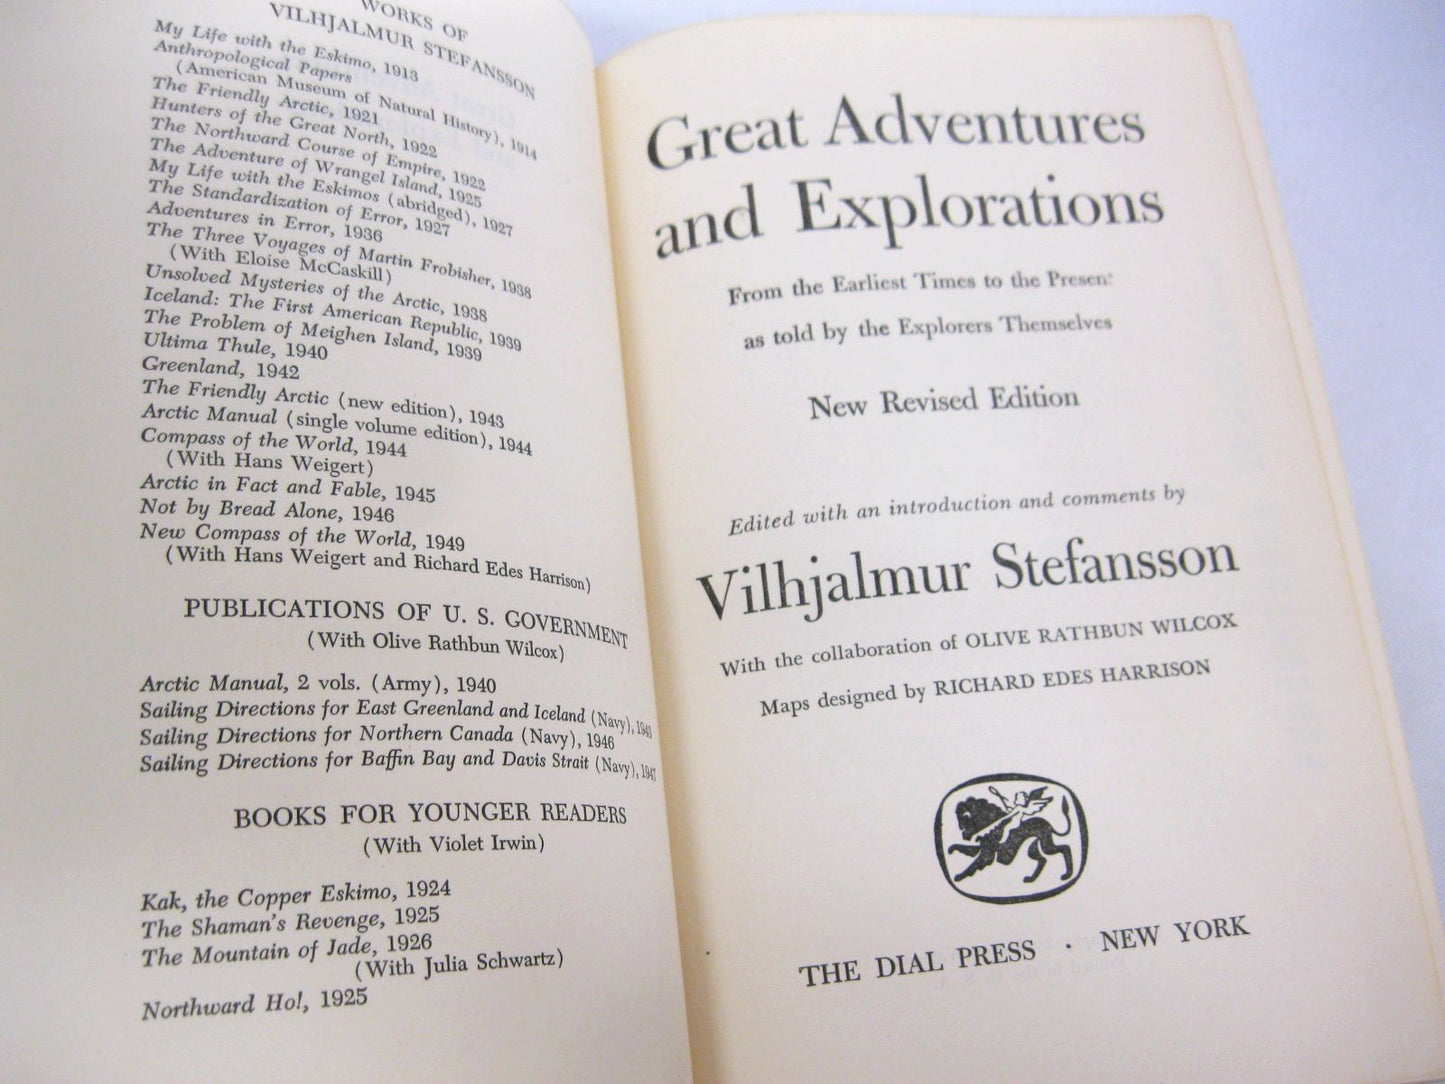 Great Adventures and Explorations by Vilhjalmur Stefansson